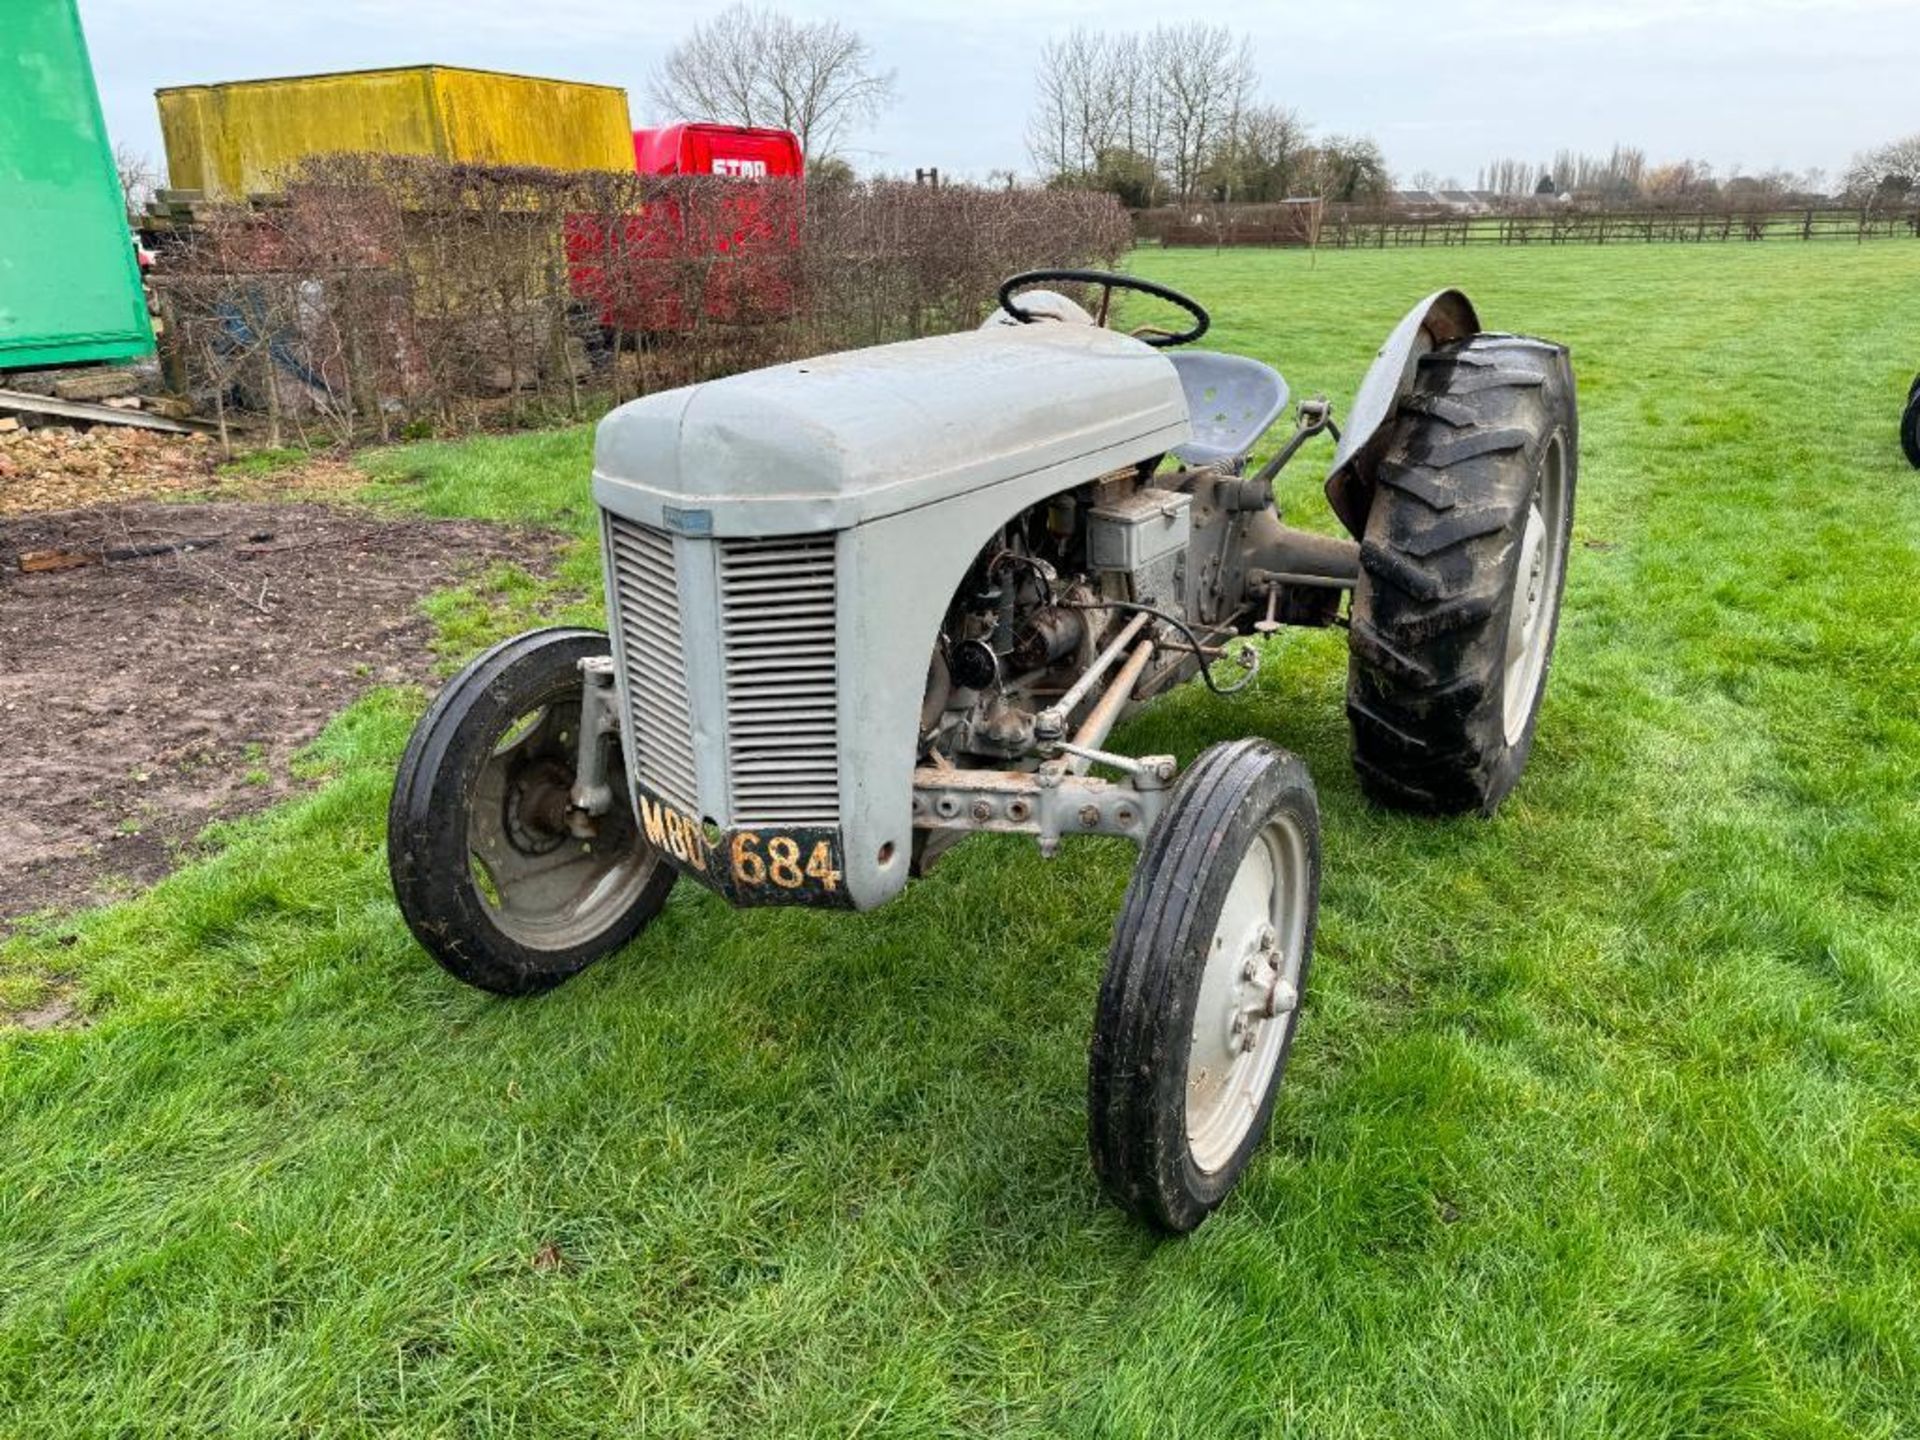 1955 Ferguson TED 2wd petrol paraffin tractor with underslung exhaust and linkage on 12.4-28 rear an - Image 2 of 11